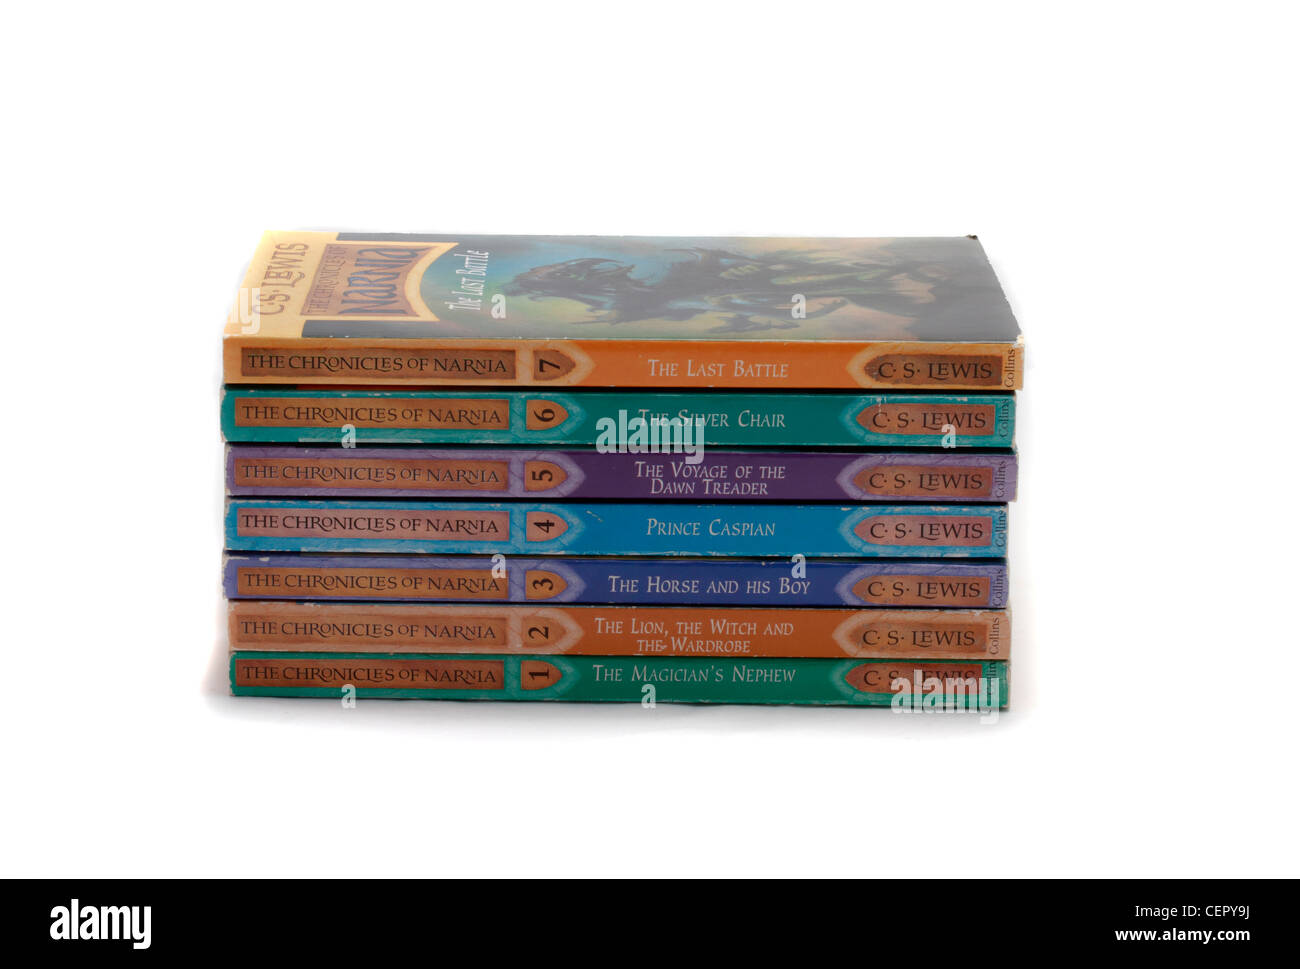 The Narnia series of books by C.S. Lewis, The Magicians Nephew, The Lion the Witch and the Wardrobe, The Horse and his boy, Prince Caspian, The Voyage of the Dawn Treader, The Silver Chair and the Last Battle - the complete series of paperback books Stock Photo